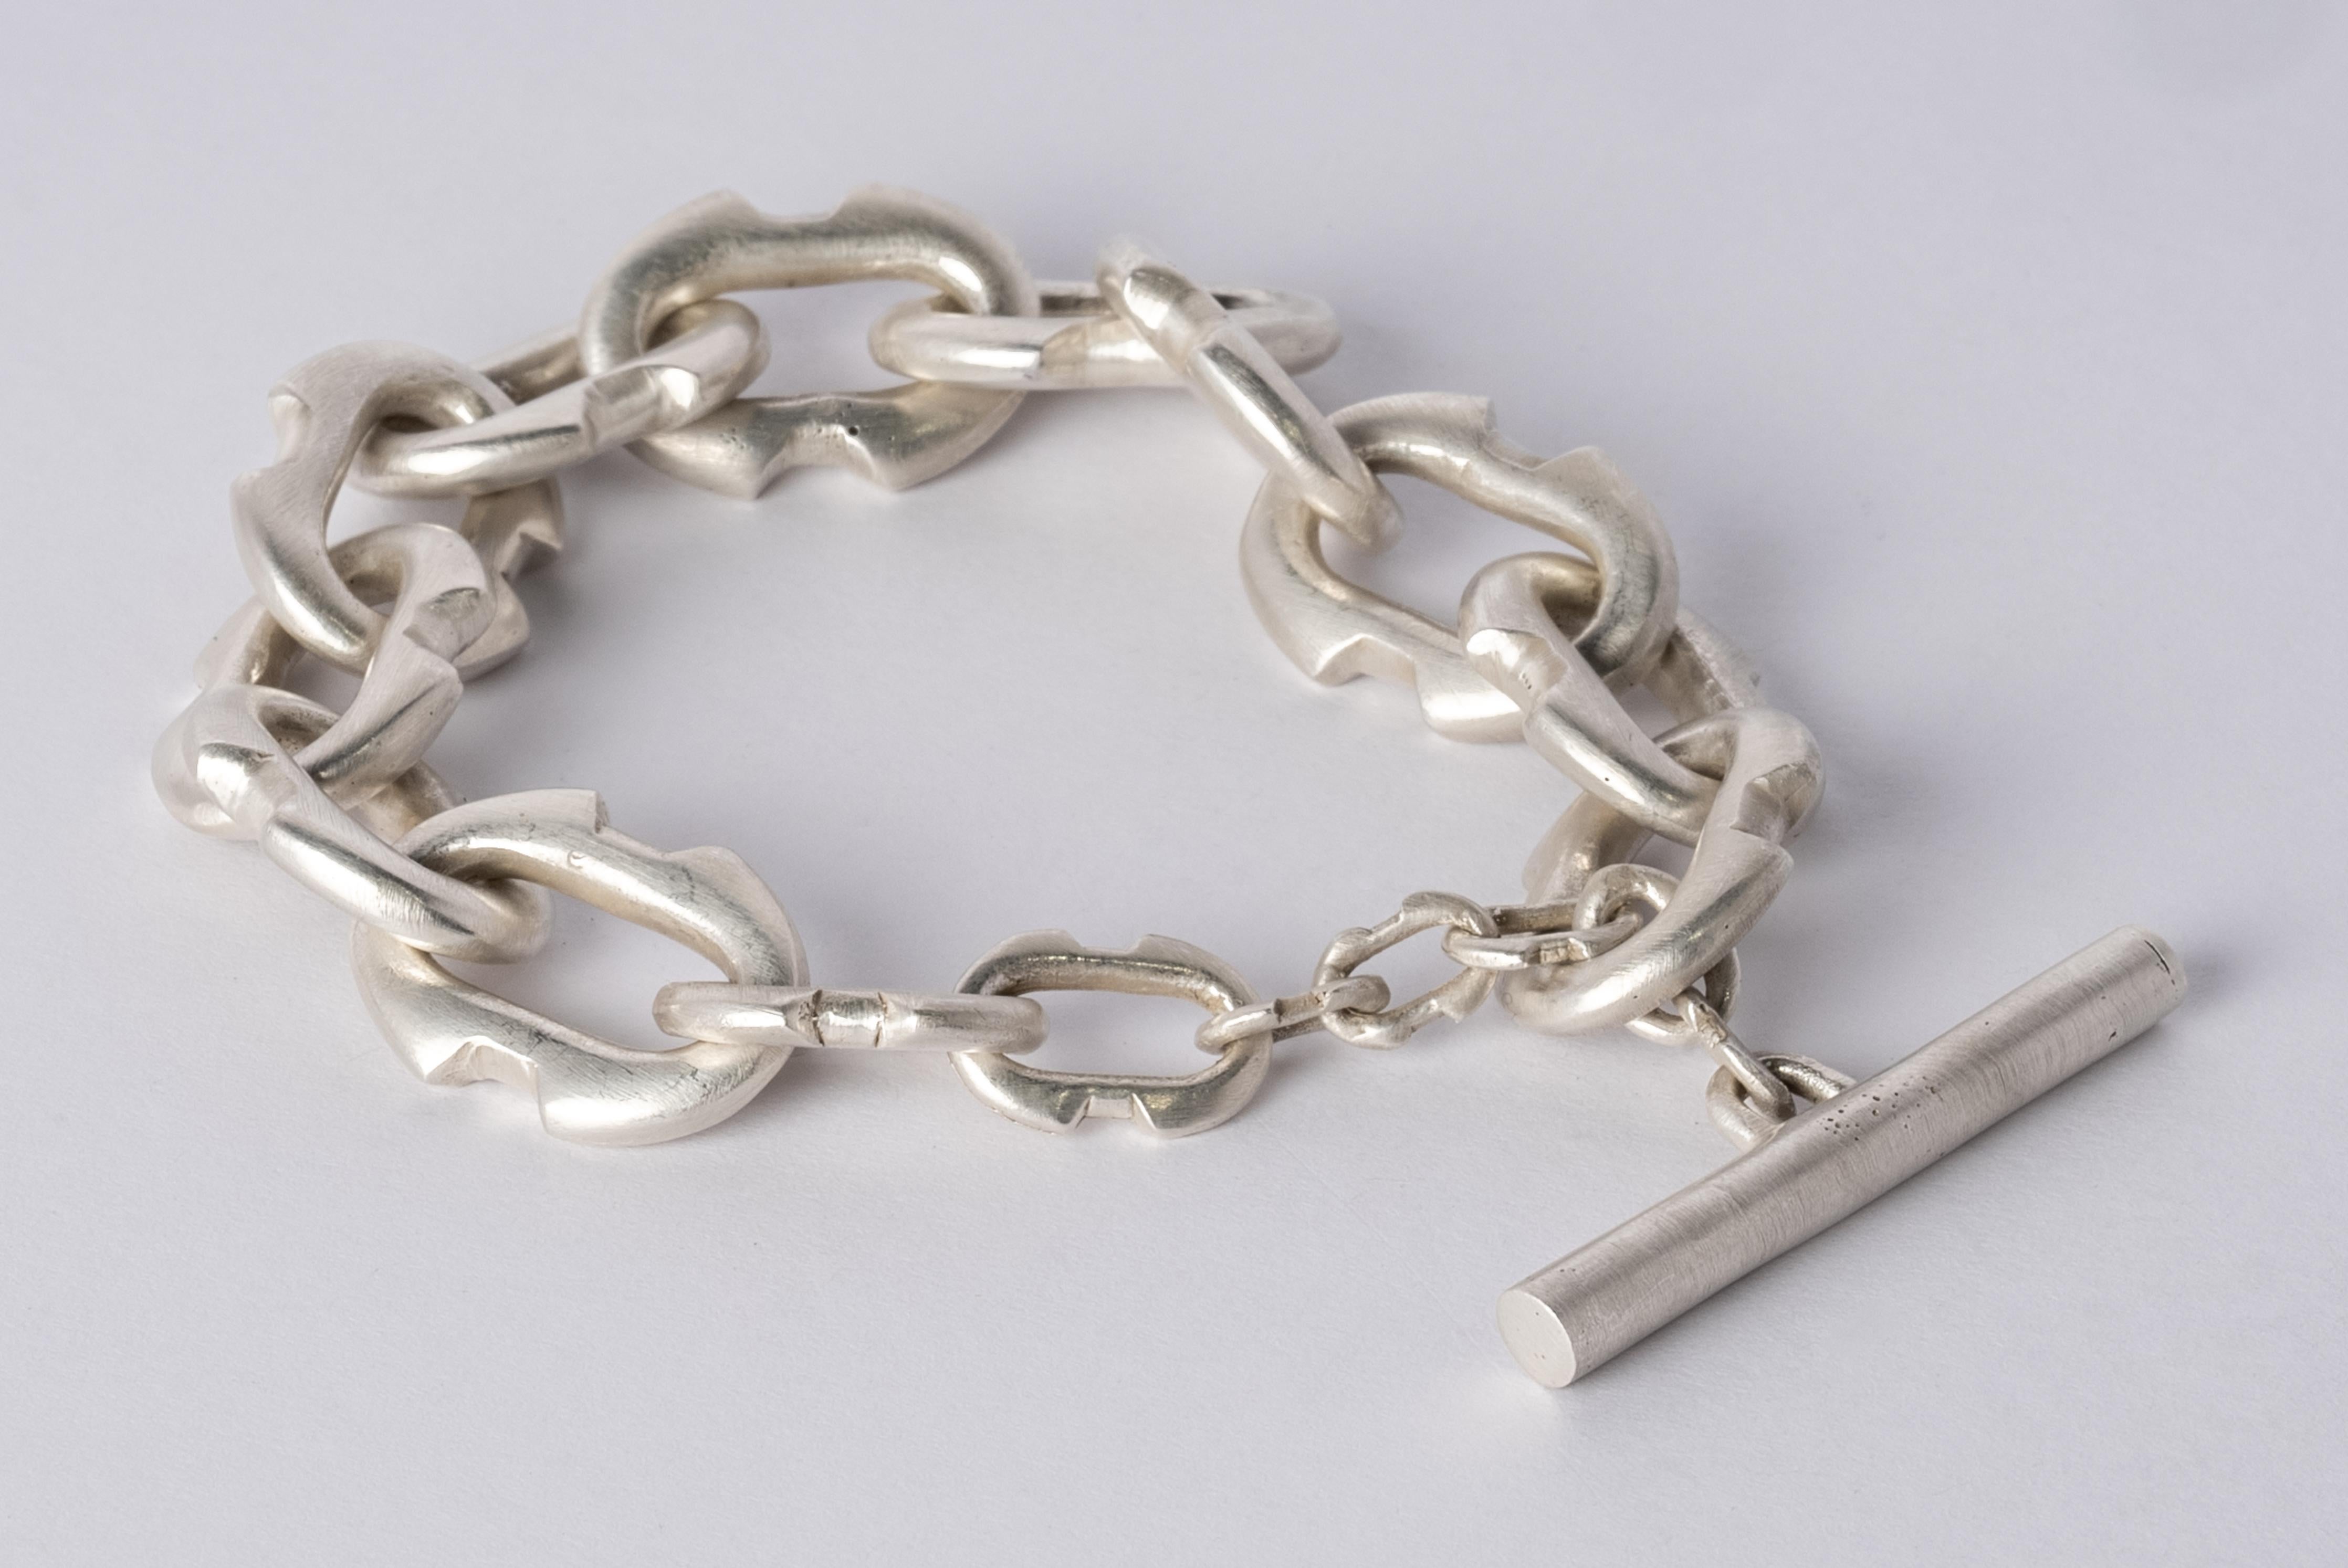 Bracelet in acid treated silver plated brass. This piece is 100% hand fabricated from metal plate; cut into sections and soldered together to make the hollow three dimensional form.
Dimensions:
Chain link size (L × H): 25 mm × 17 mm
Toggle length: